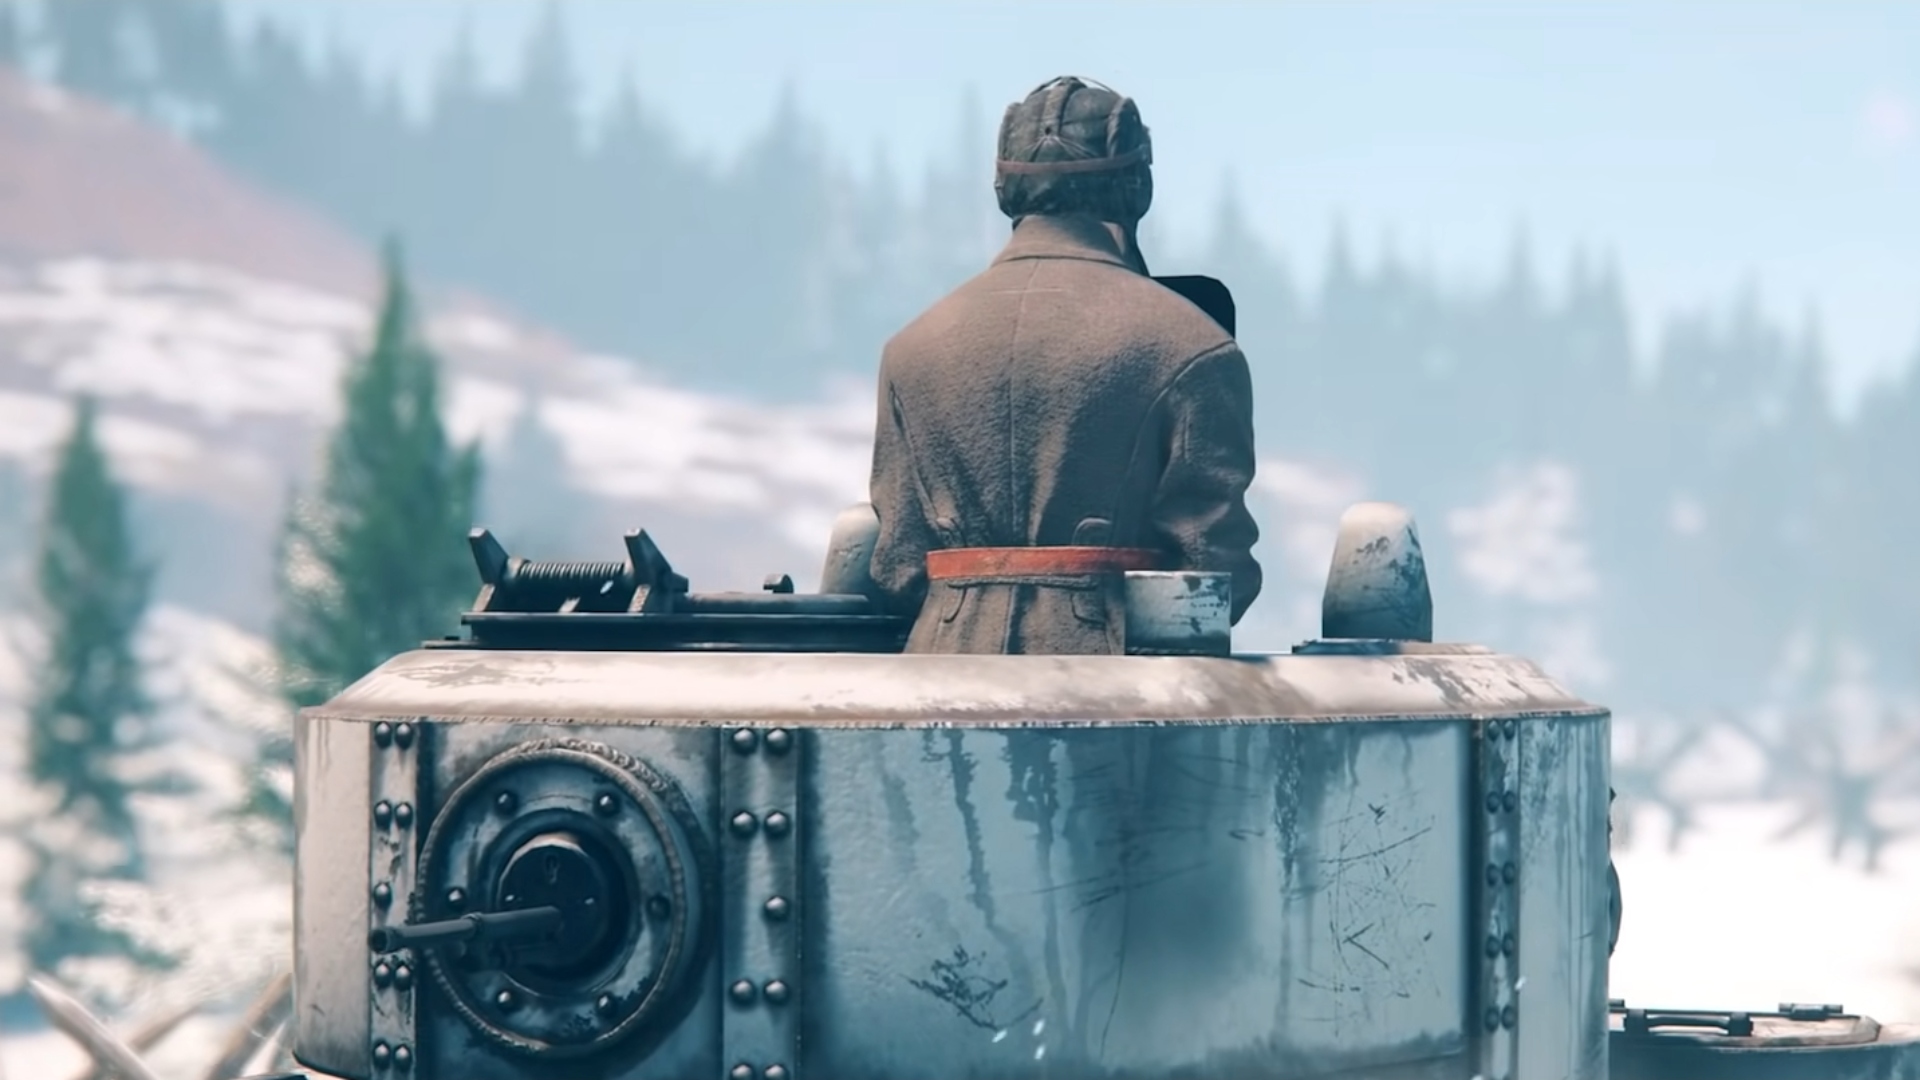 Best free MMOs: A soldier peeps from a tank in the snow